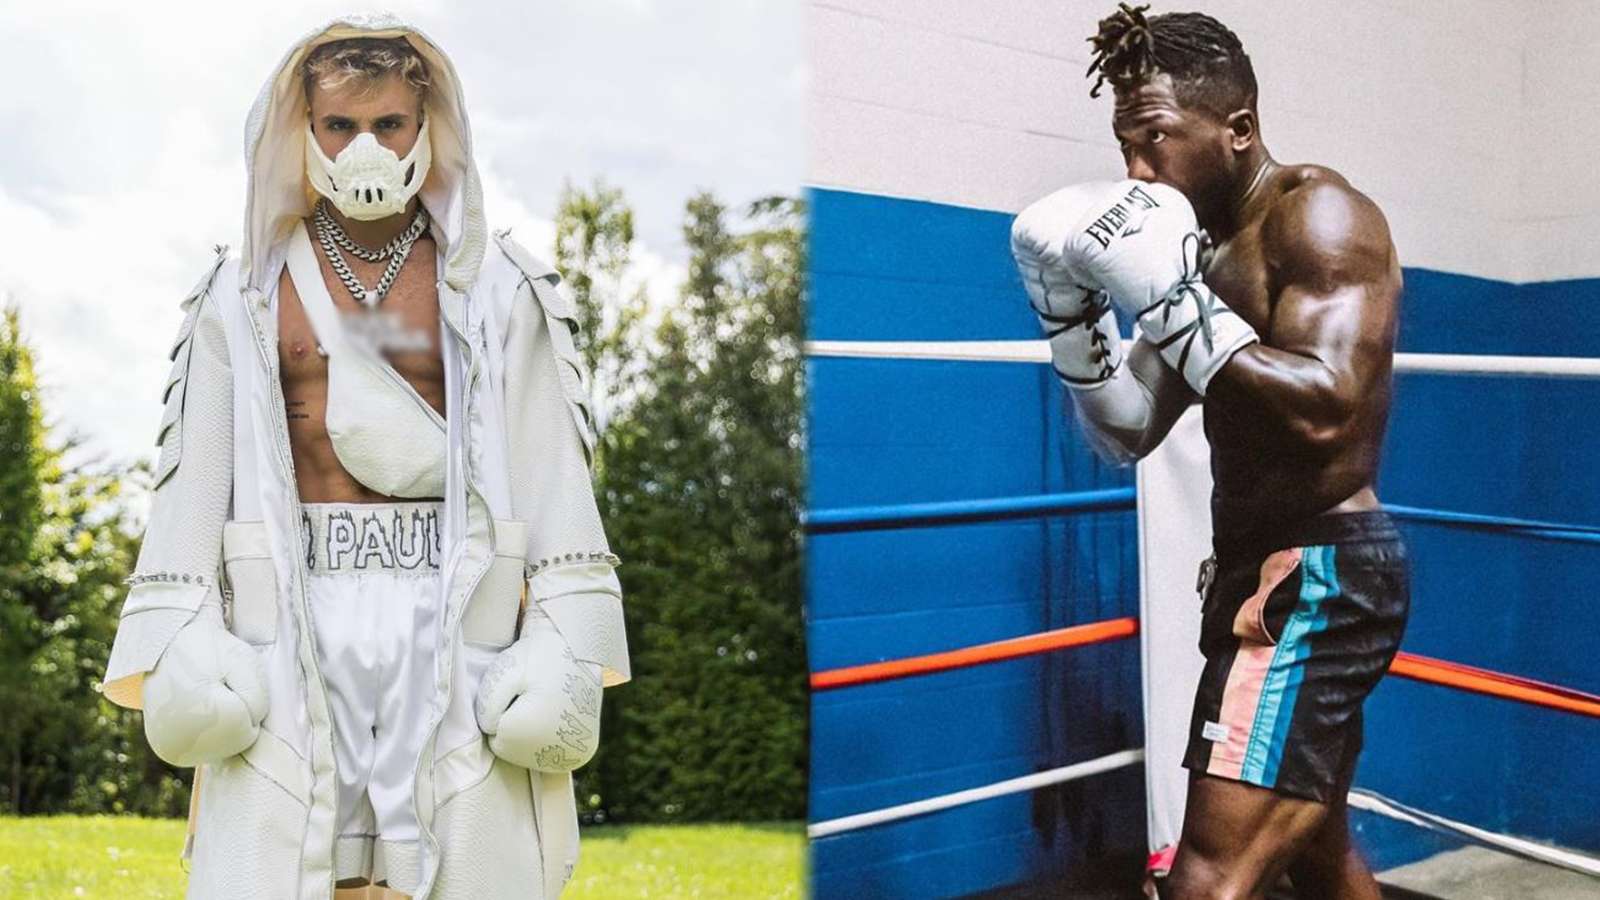 Jake Paul and Nate Robinson pose in boxing gear